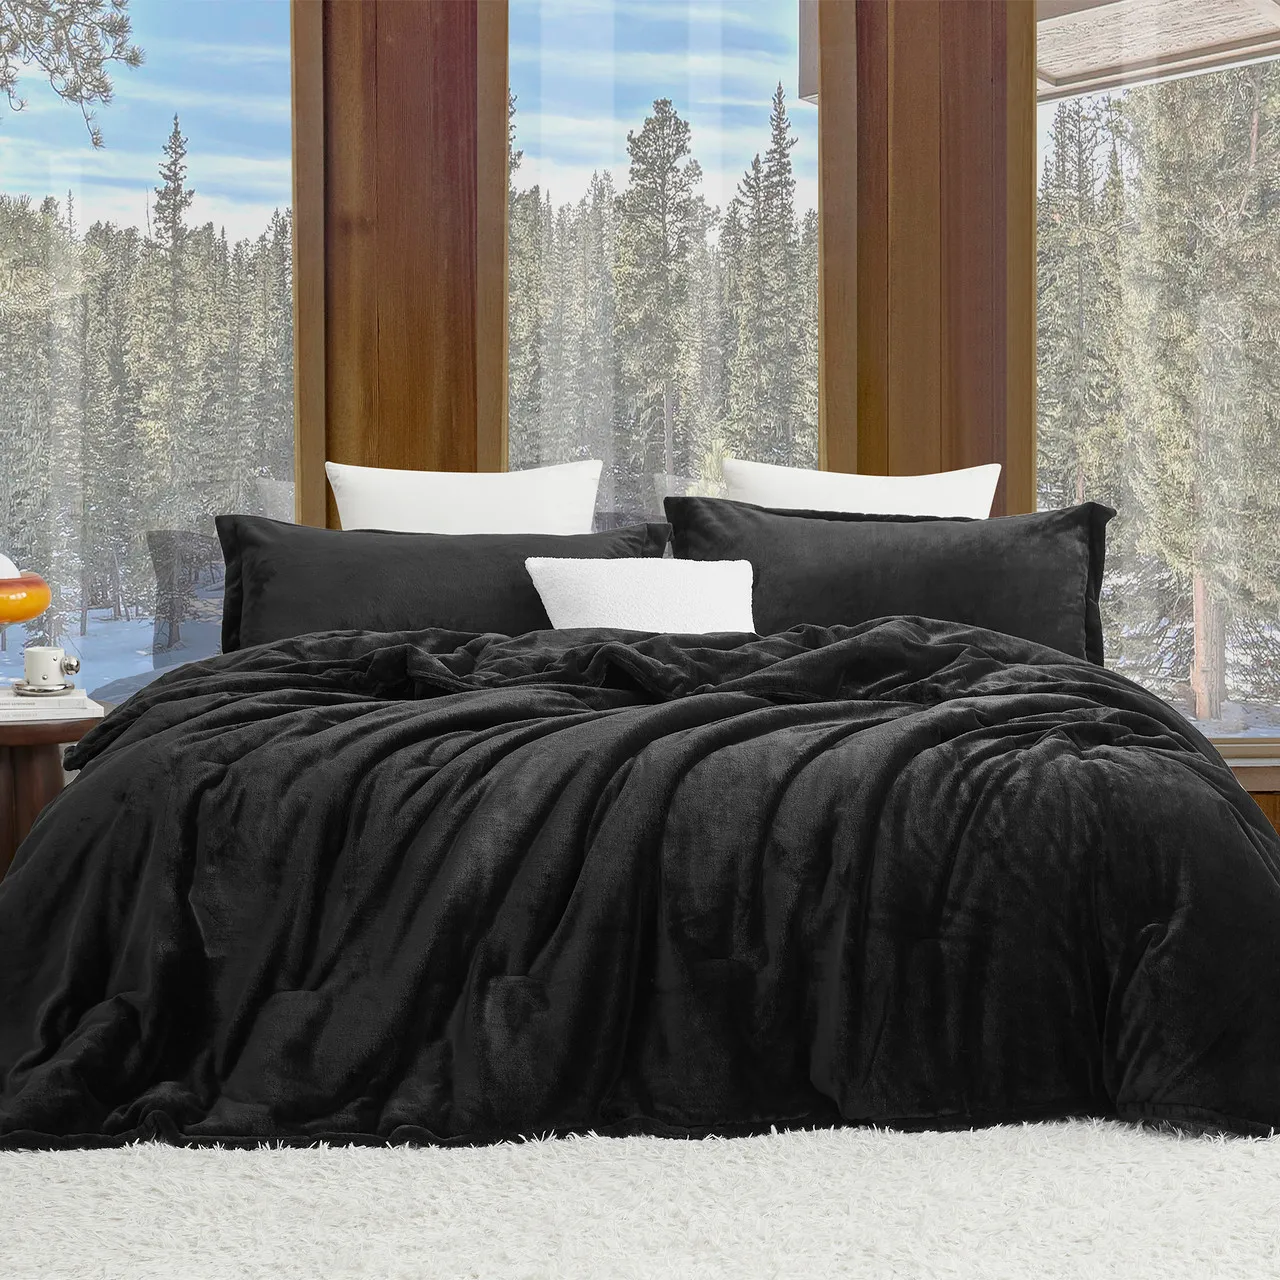 Softer than Soft - Coma Inducer� Oversized Comforter Set